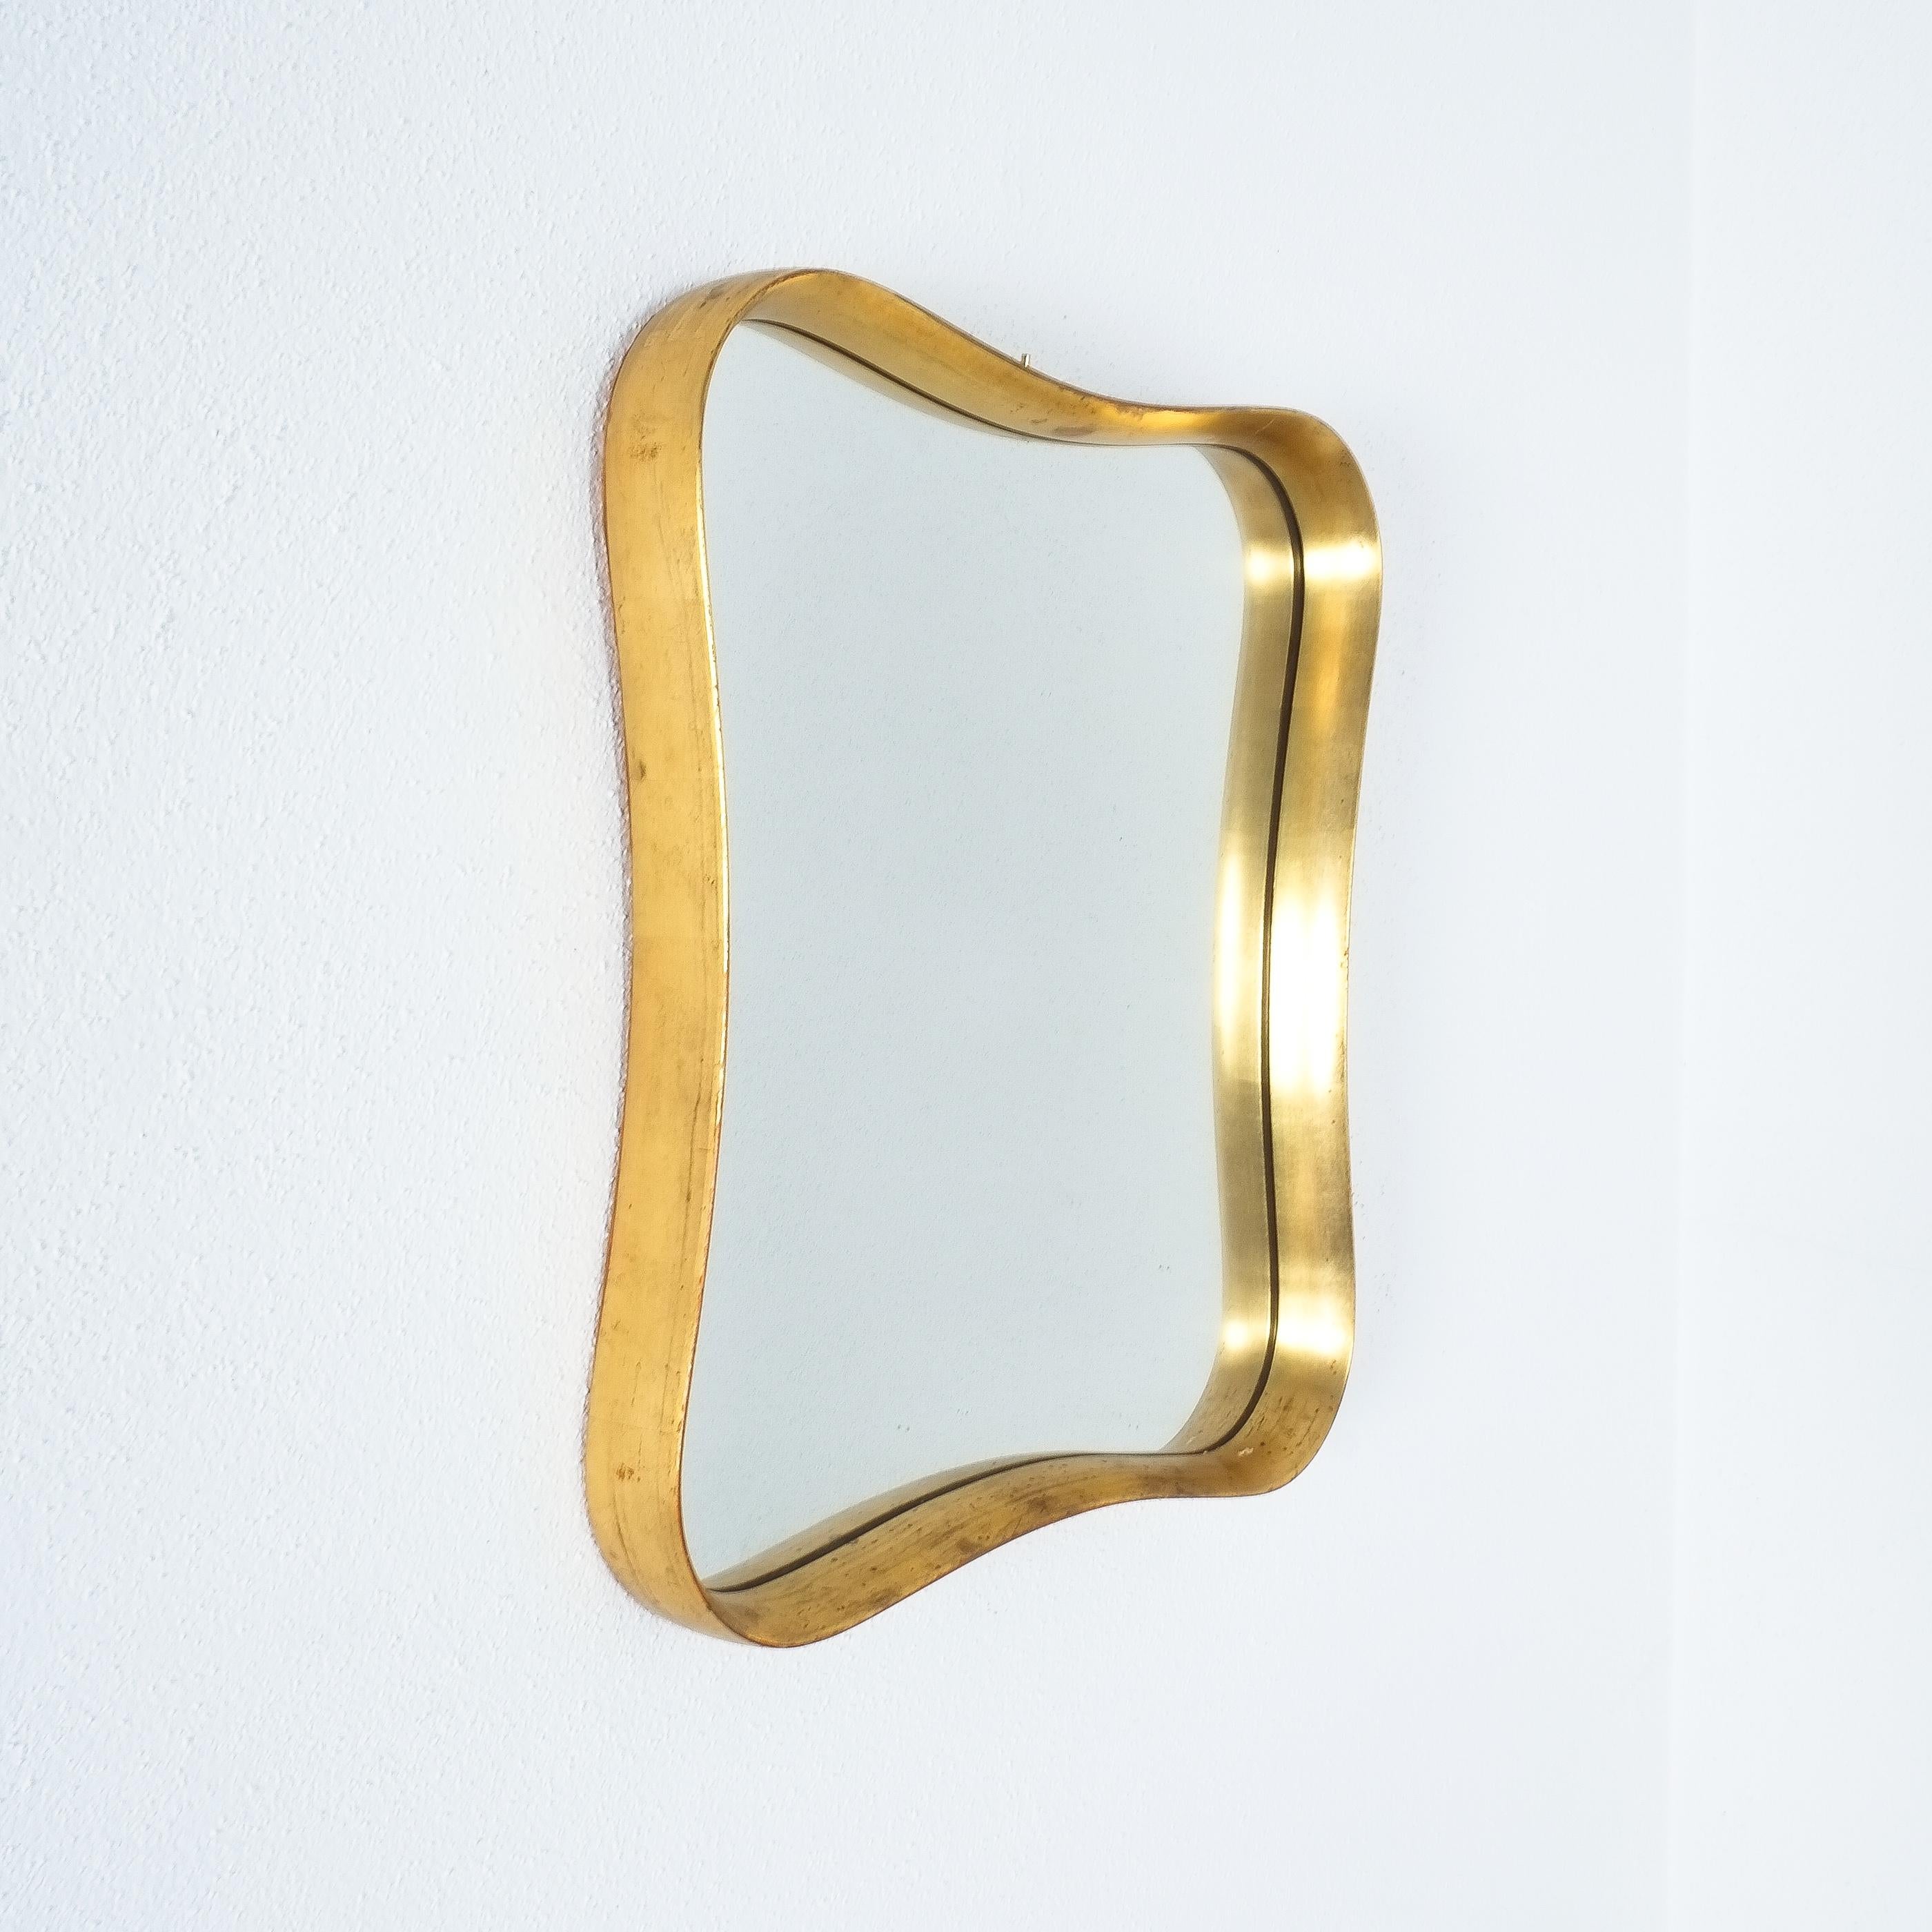 Gold Leaf Mirror Classical Shape, Midcentury, France In Good Condition For Sale In Vienna, AT